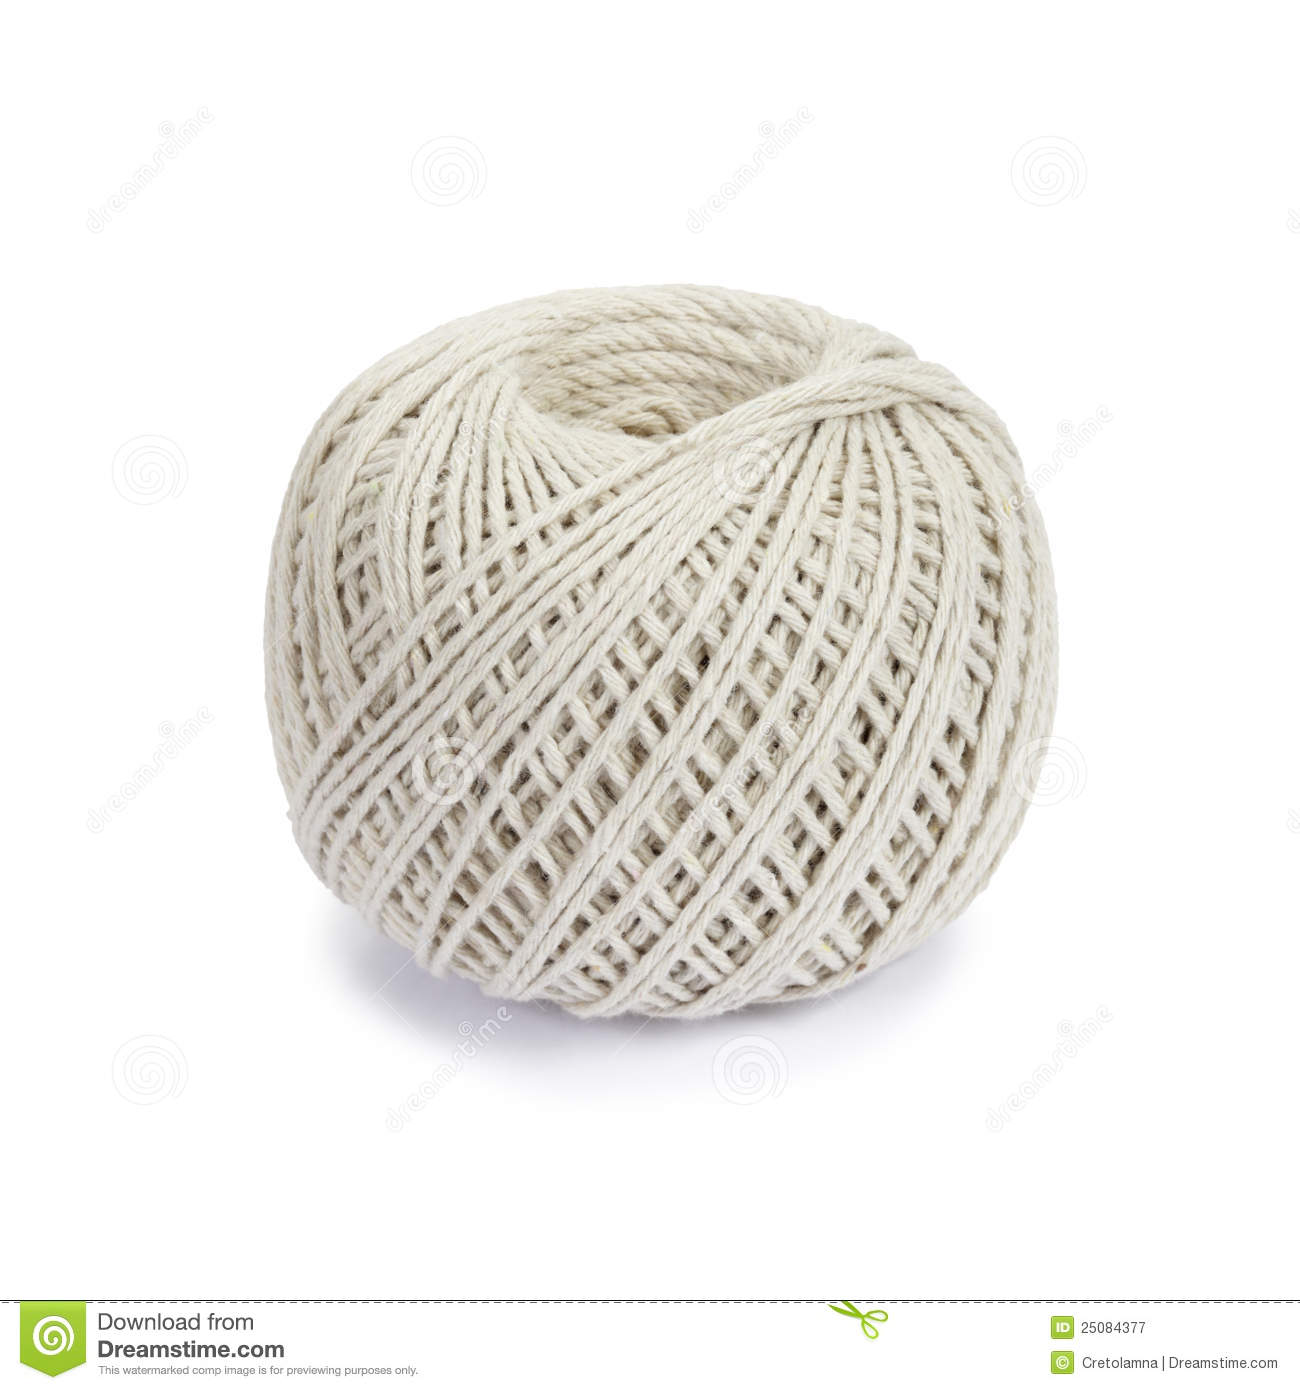 Ball Of String  Royalty Free Stock Photography   Image  25084377